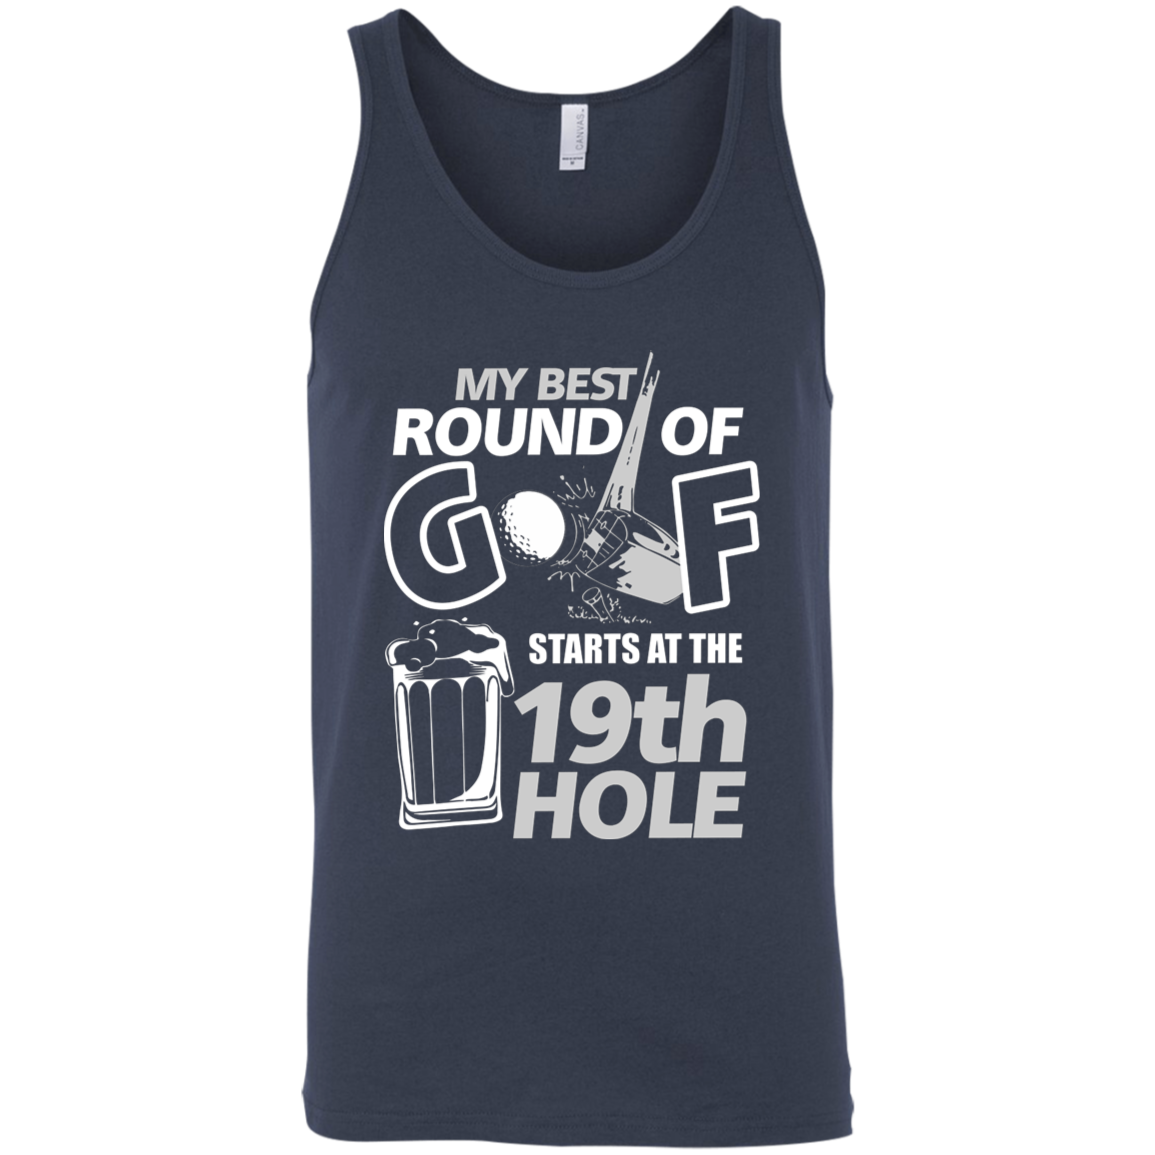 My Best Round Of Golf Starts At The 19th Hole Tank Top Apparel - The Beer Lodge